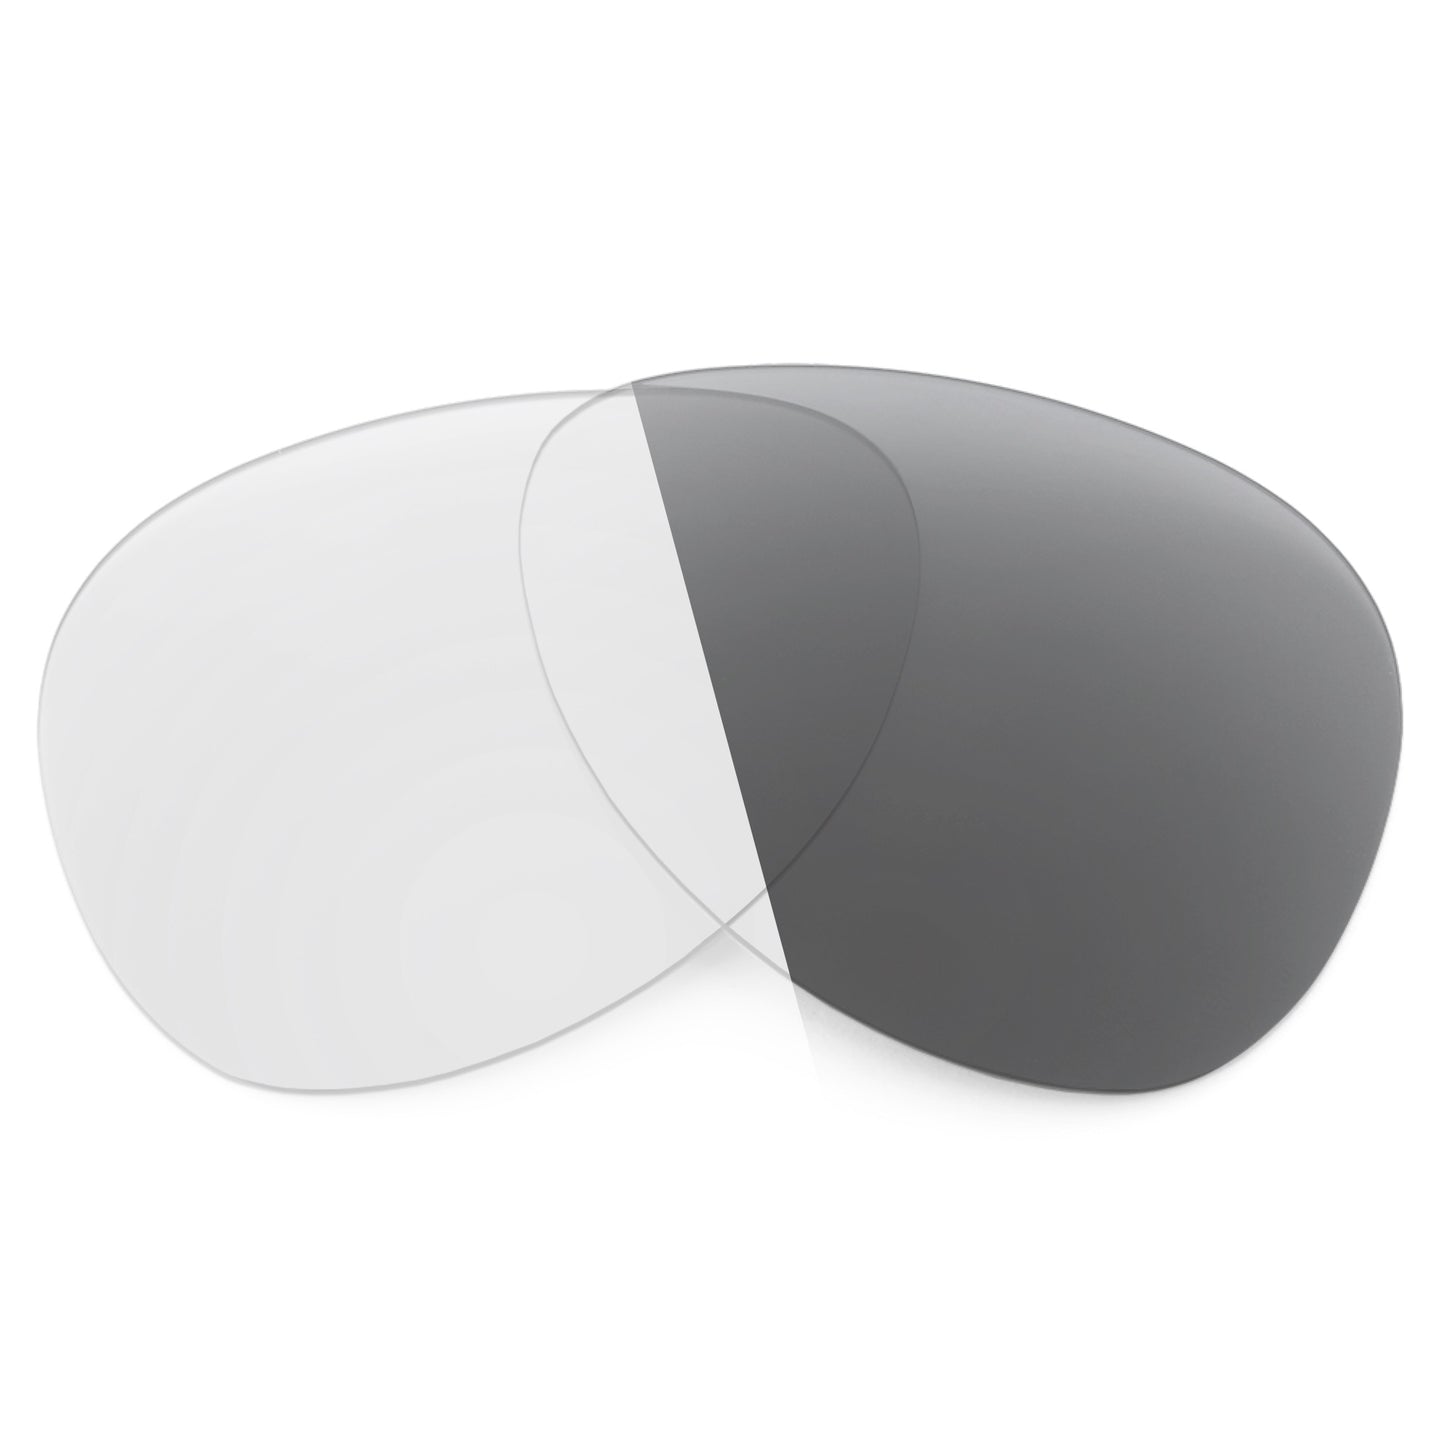 Revant replacement lenses for Ray-Ban RB8313 58mm Non-Polarized Adapt Gray Photochromic